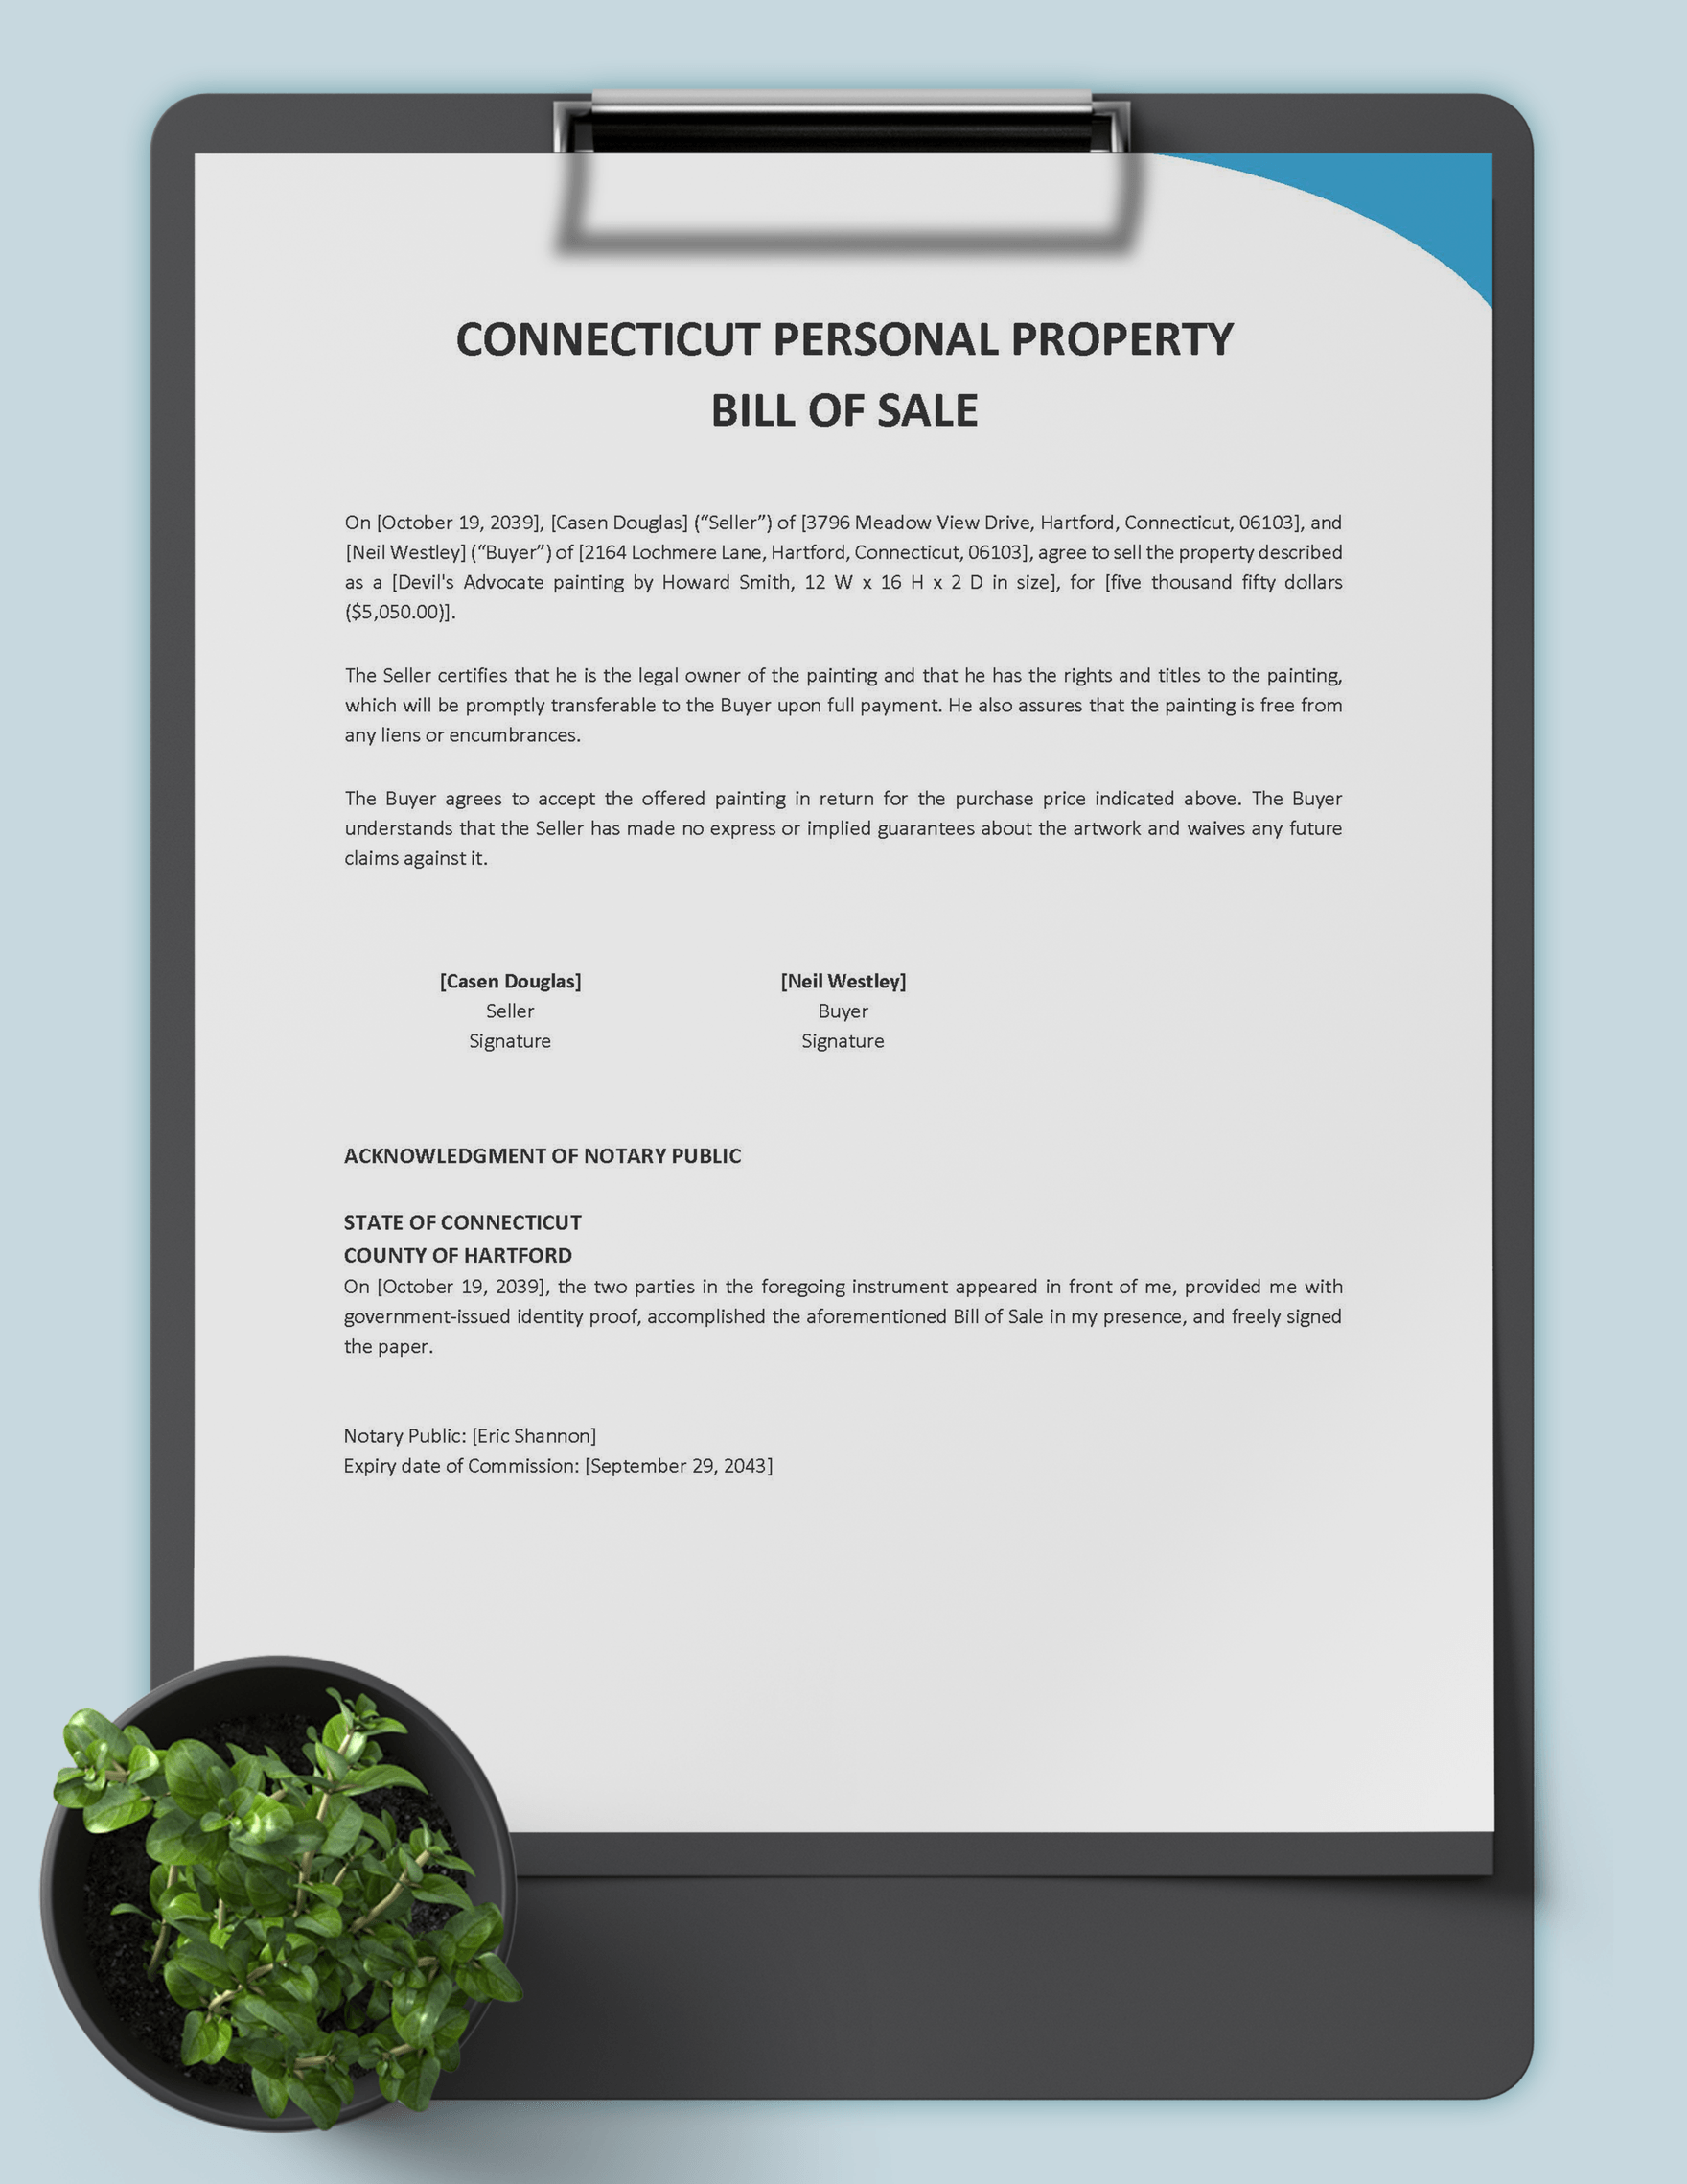 Connecticut Personal Property Bill of Sale Form Template